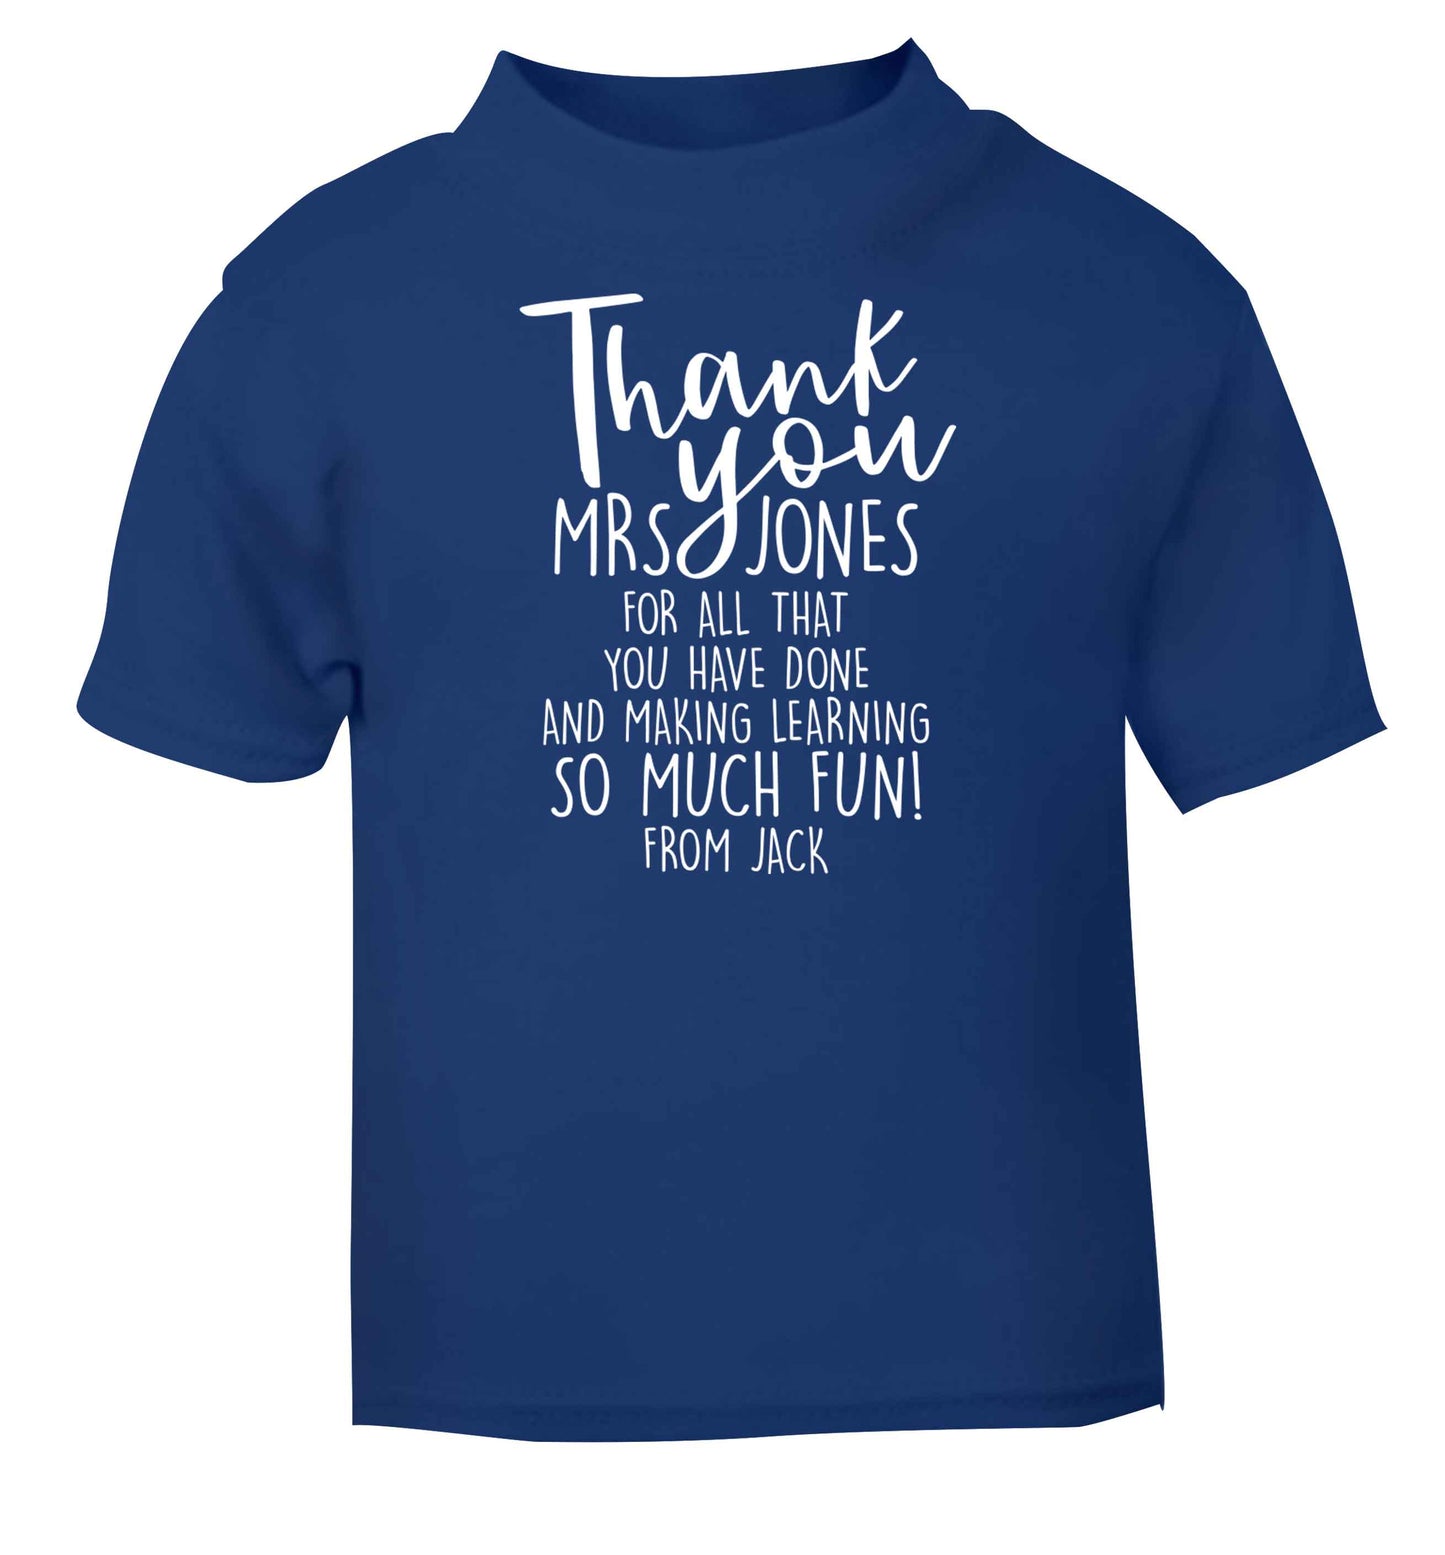 Personalised thank you teacher for all that you've done and making learning so much fun blue baby toddler Tshirt 2 Years